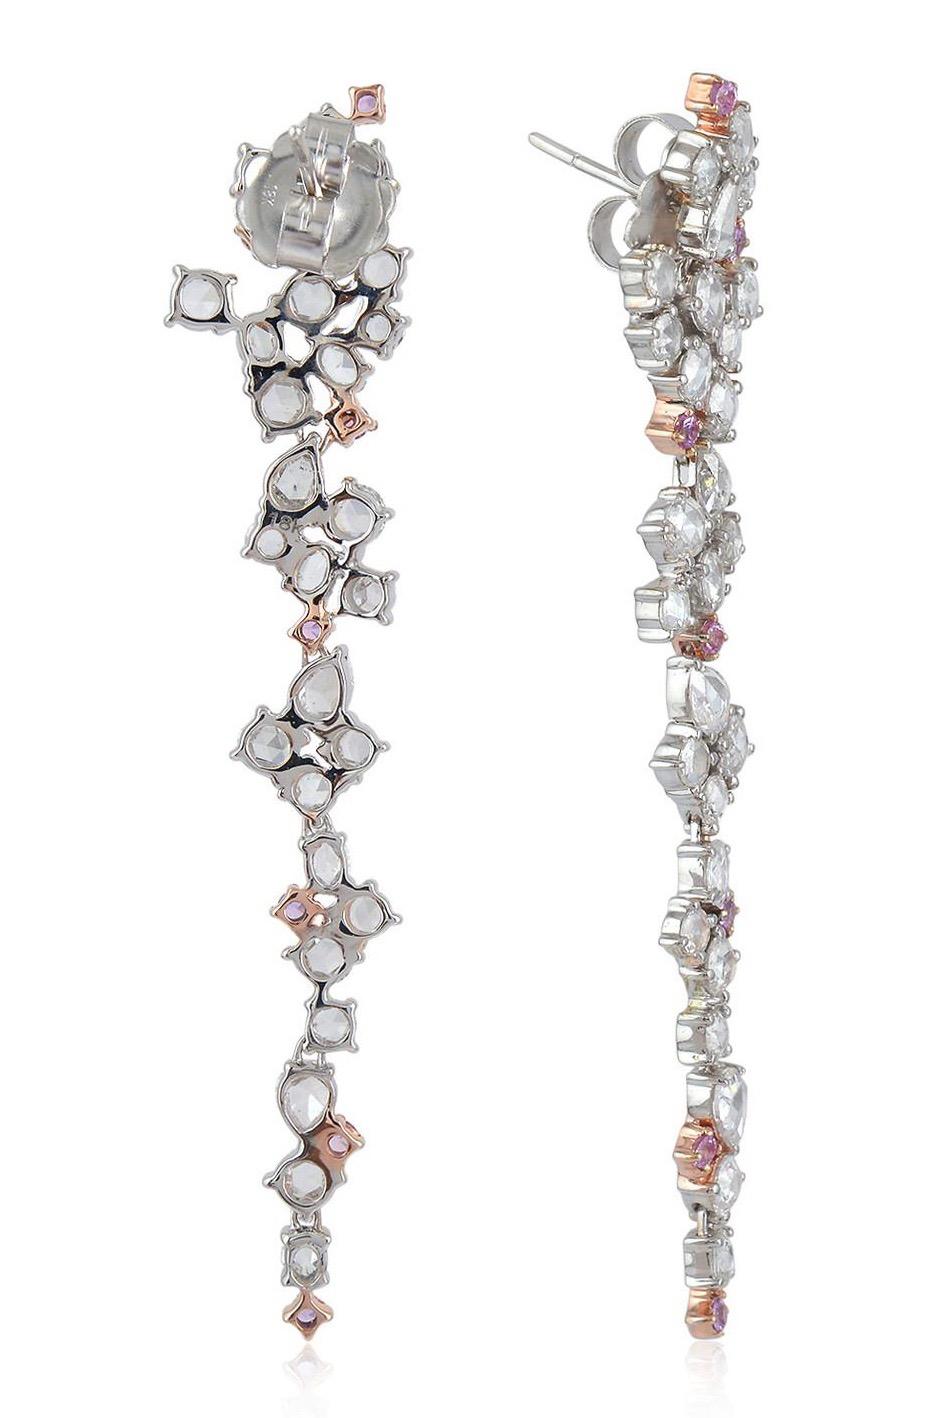 Handcrafted from 18-karat white gold, these exquisite drop earrings are set with 4.16 carats of rosecut diamonds and .6 carats pink sapphire.

FOLLOW  MEGHNA JEWELS storefront to view the latest collection & exclusive pieces.  Meghna Jewels is